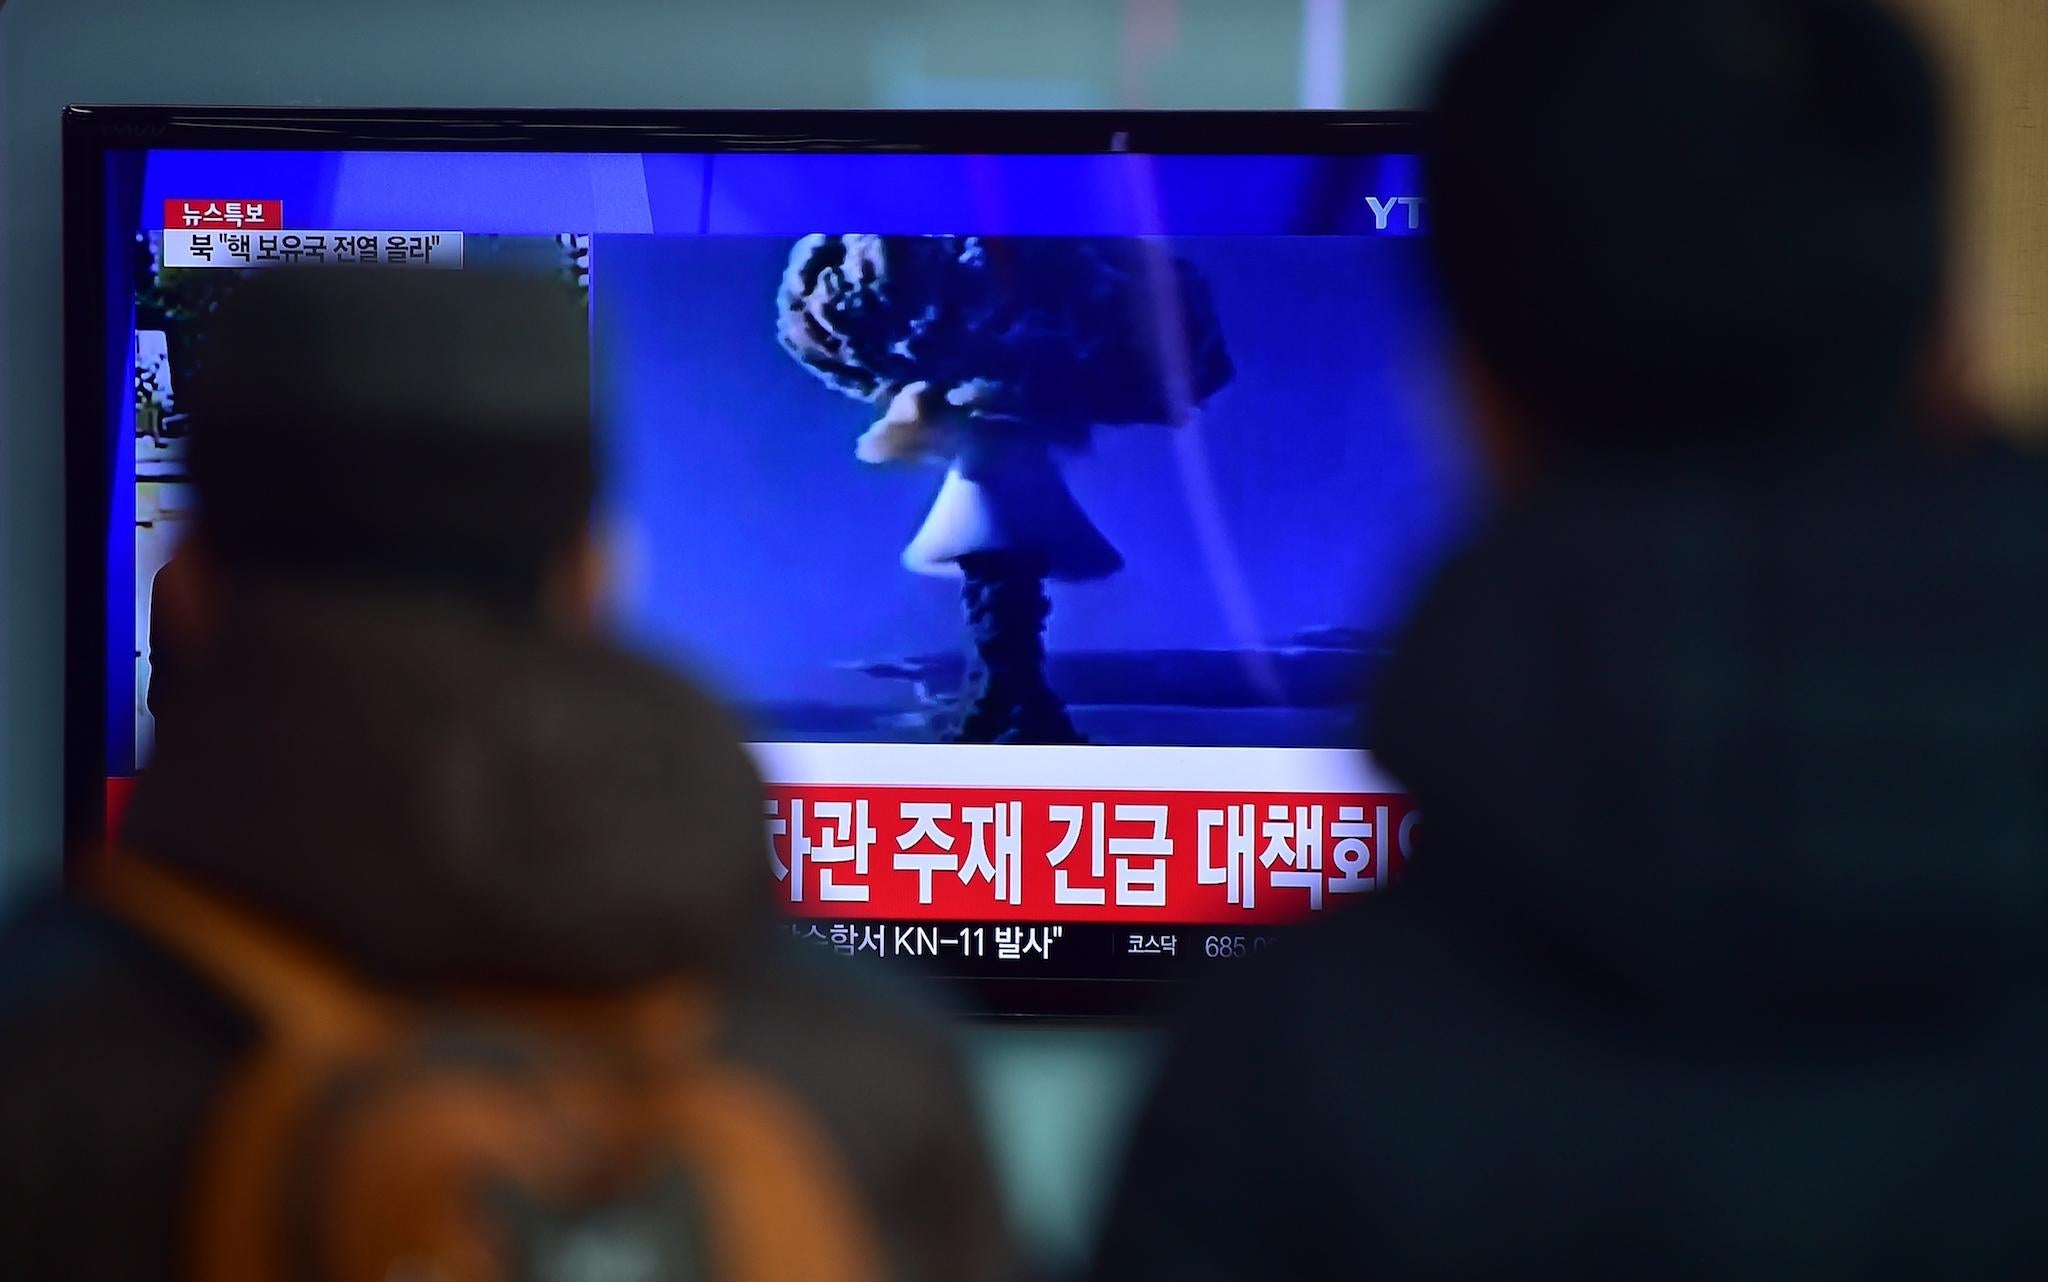 A news report on North Korea’s first hydrogen bomb test at a railroad station in Seoul, 2016